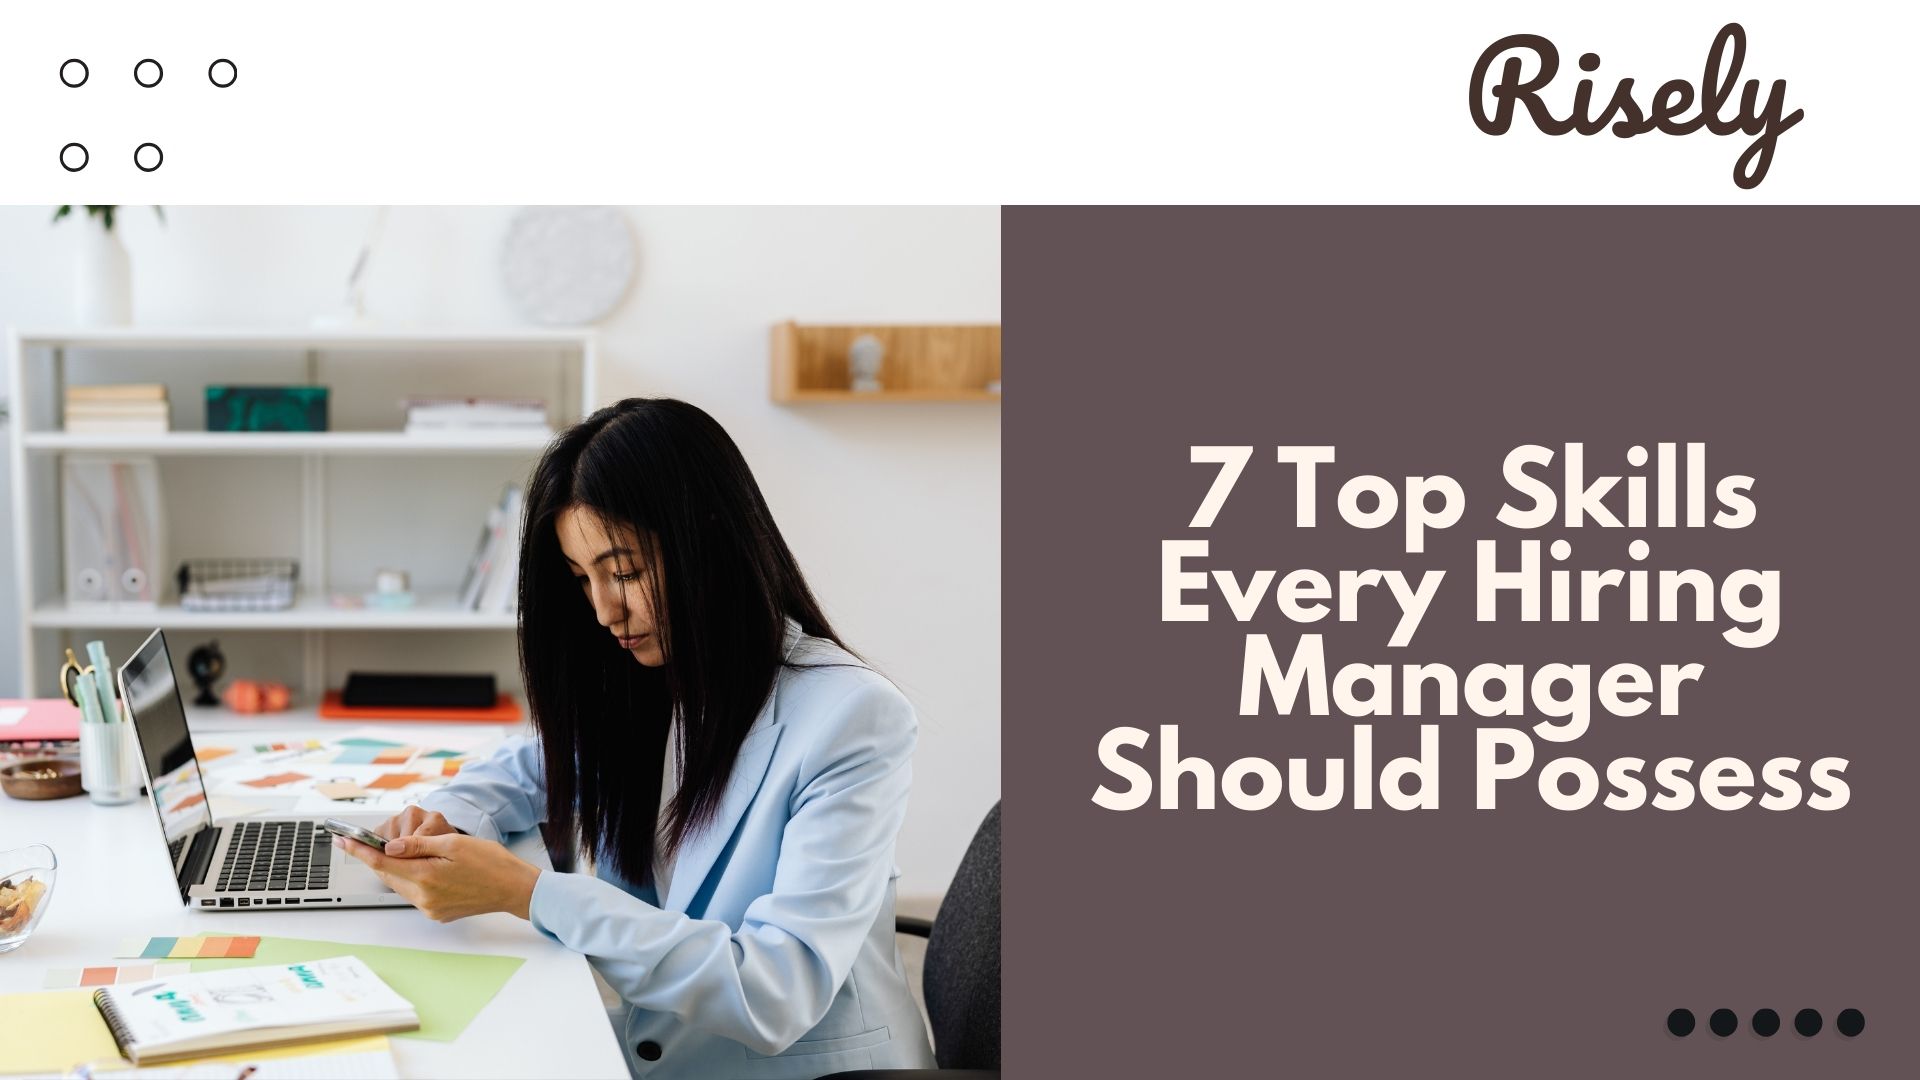 7 Top Skills Every Hiring Manager Should Possess